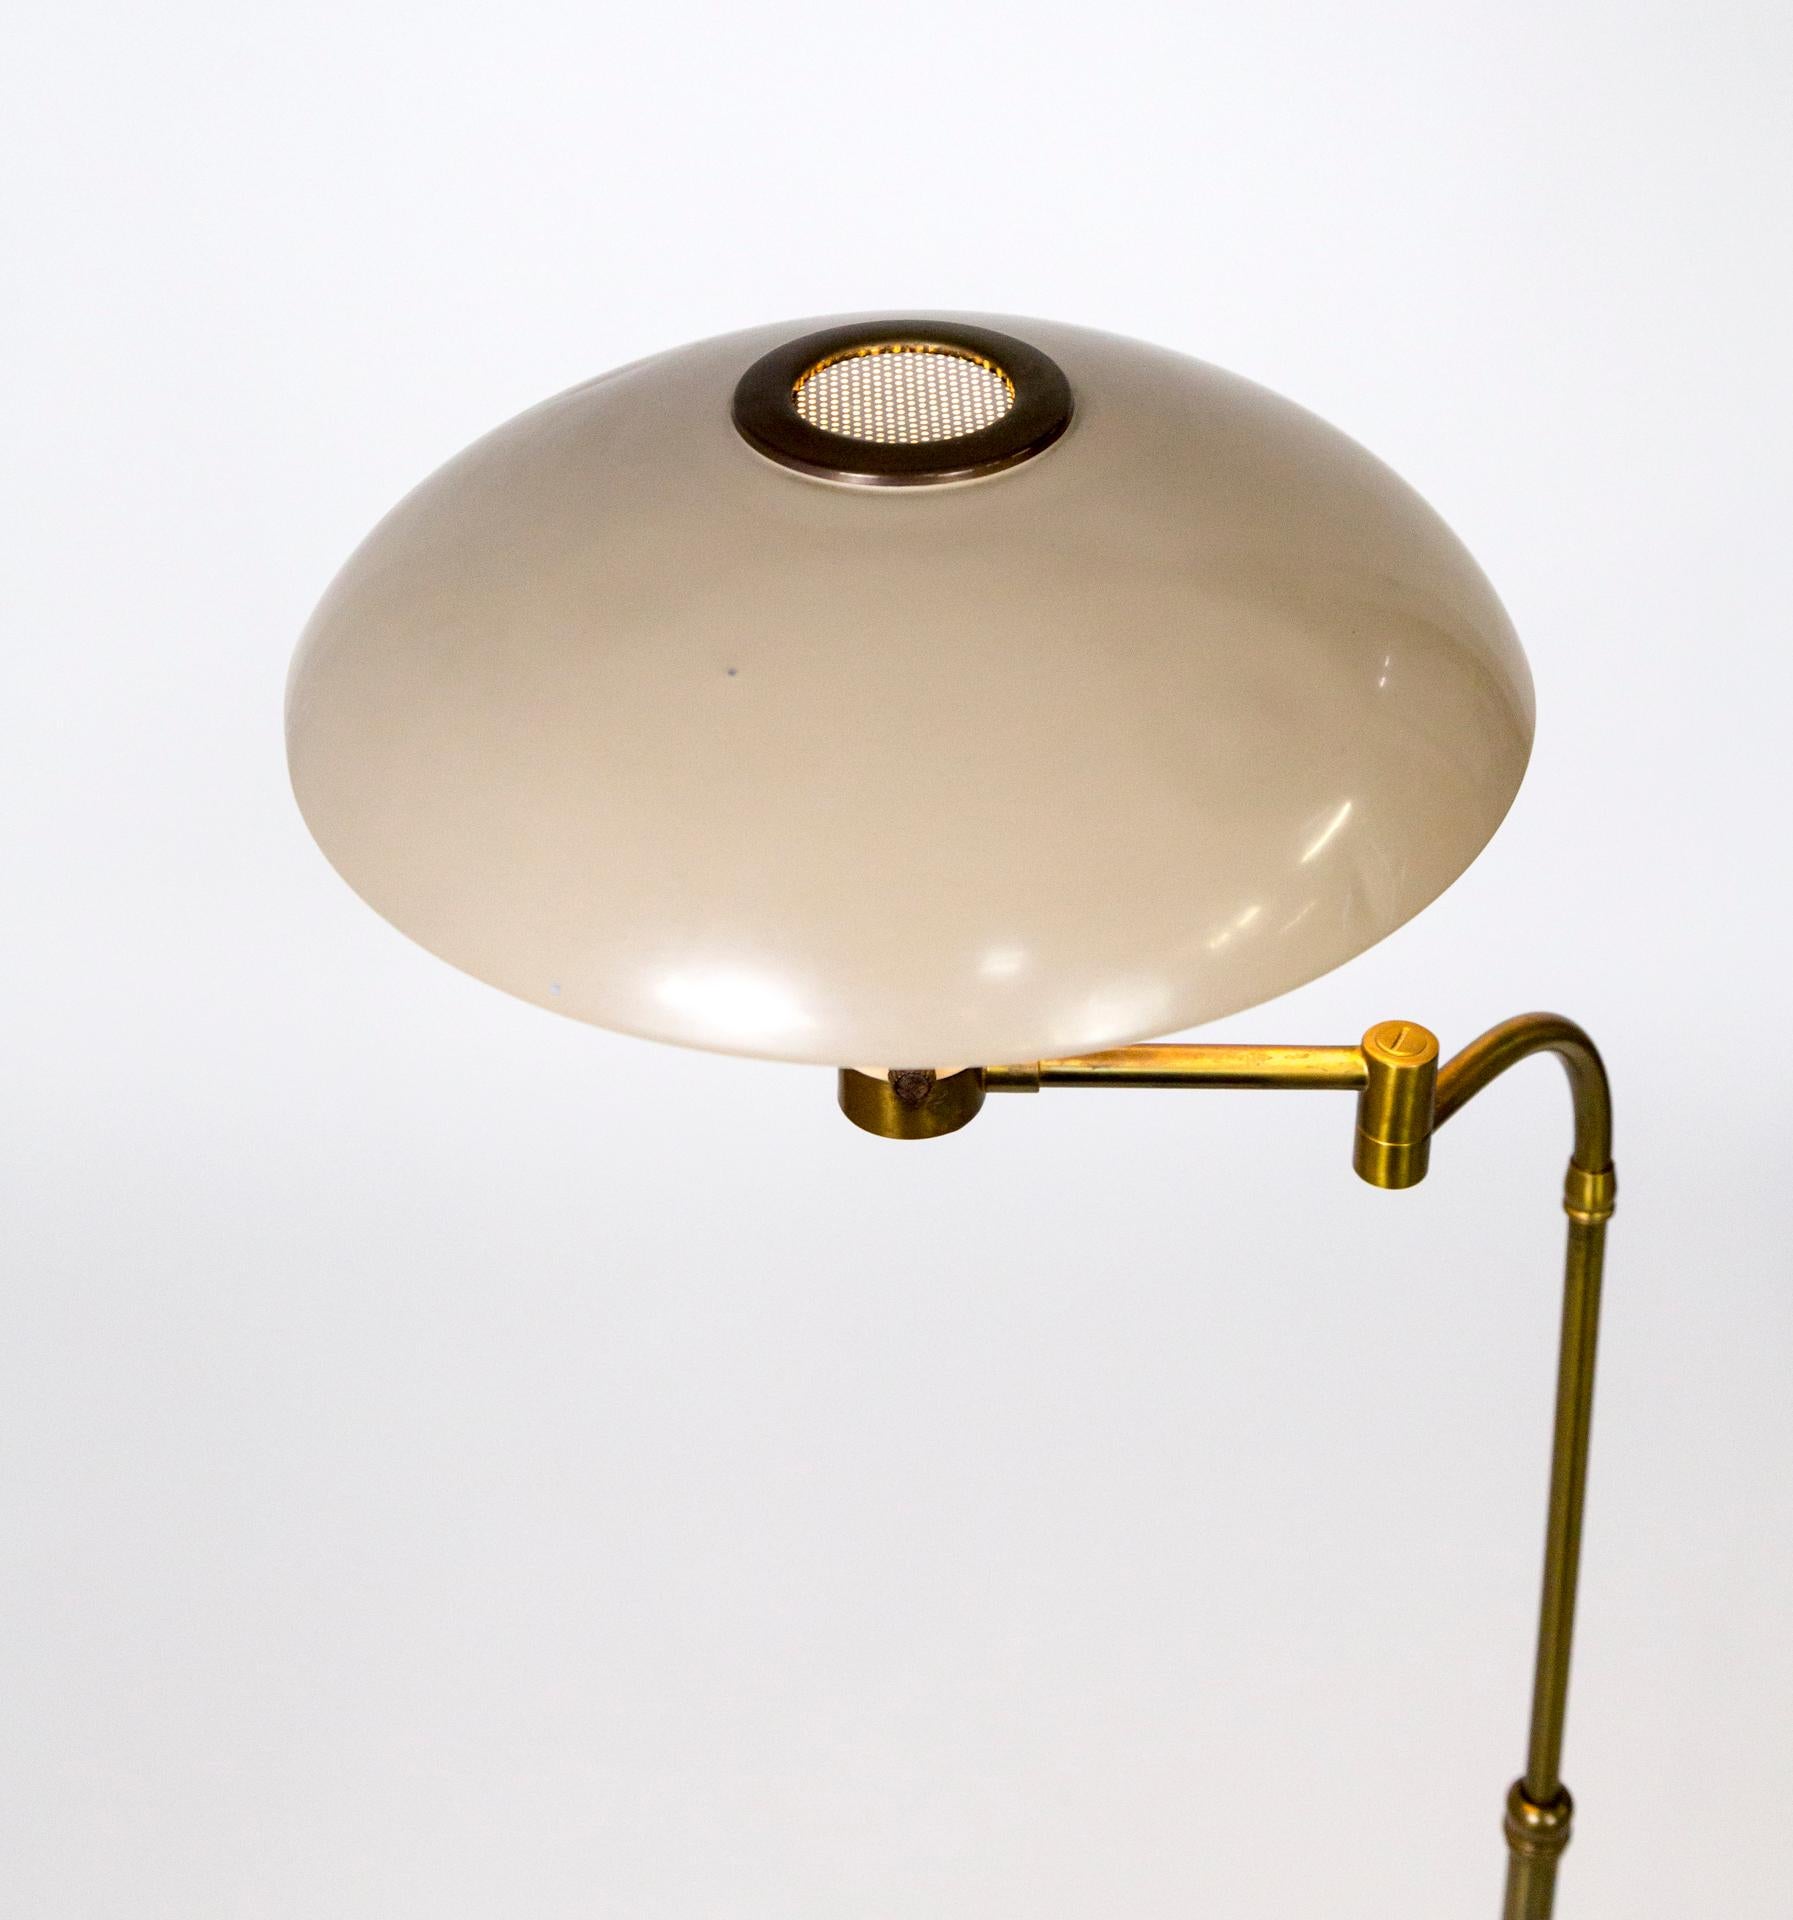 A rare floor lamp in this design- flying saucer style shade with mesh, brass banded accent on top; buff color lacquered metal shade and base. Complimented with a sloping brass stem with an articulating arm, and brass covered, weighted base.